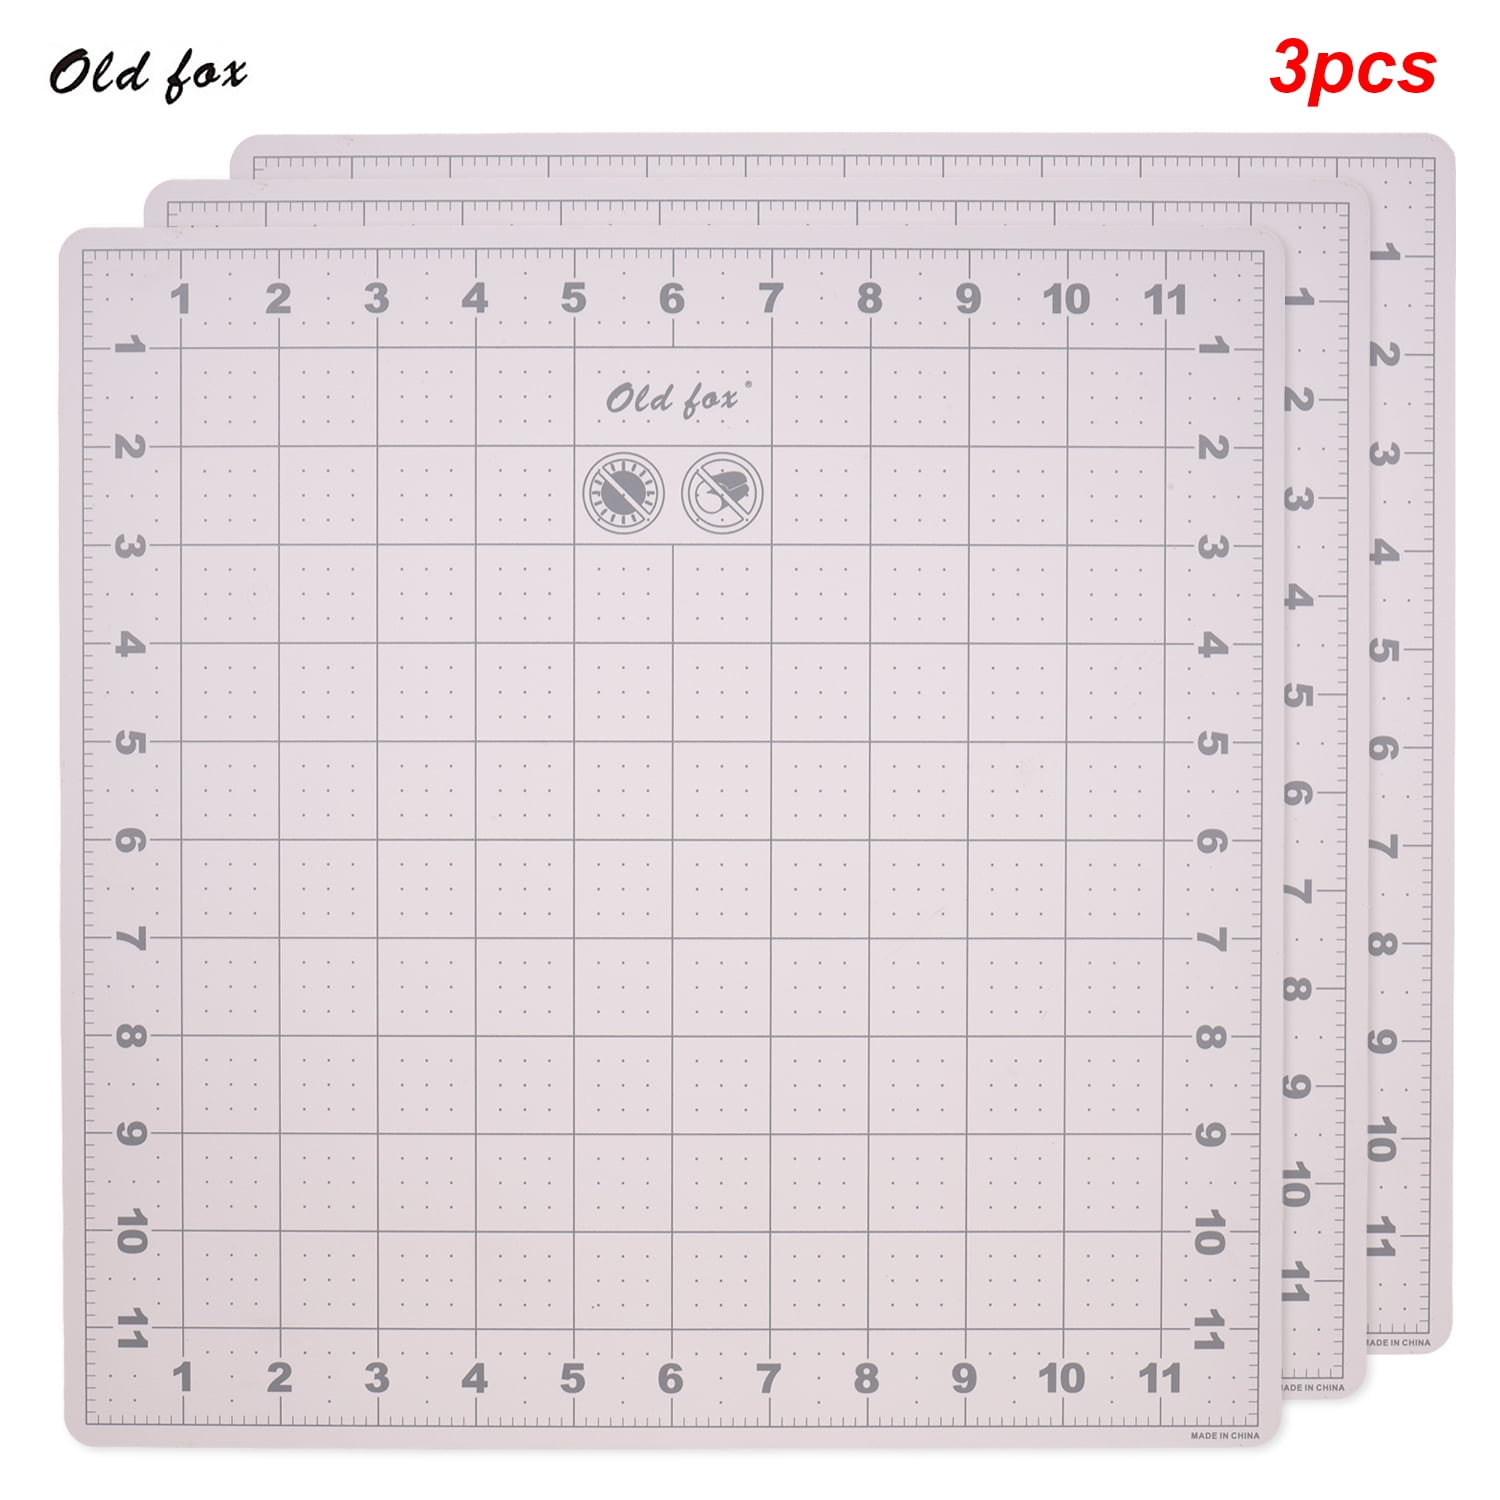 OLD FOX 12 * 12 Inch Durable Cutting Mat Self Healing Double Sided Non ...